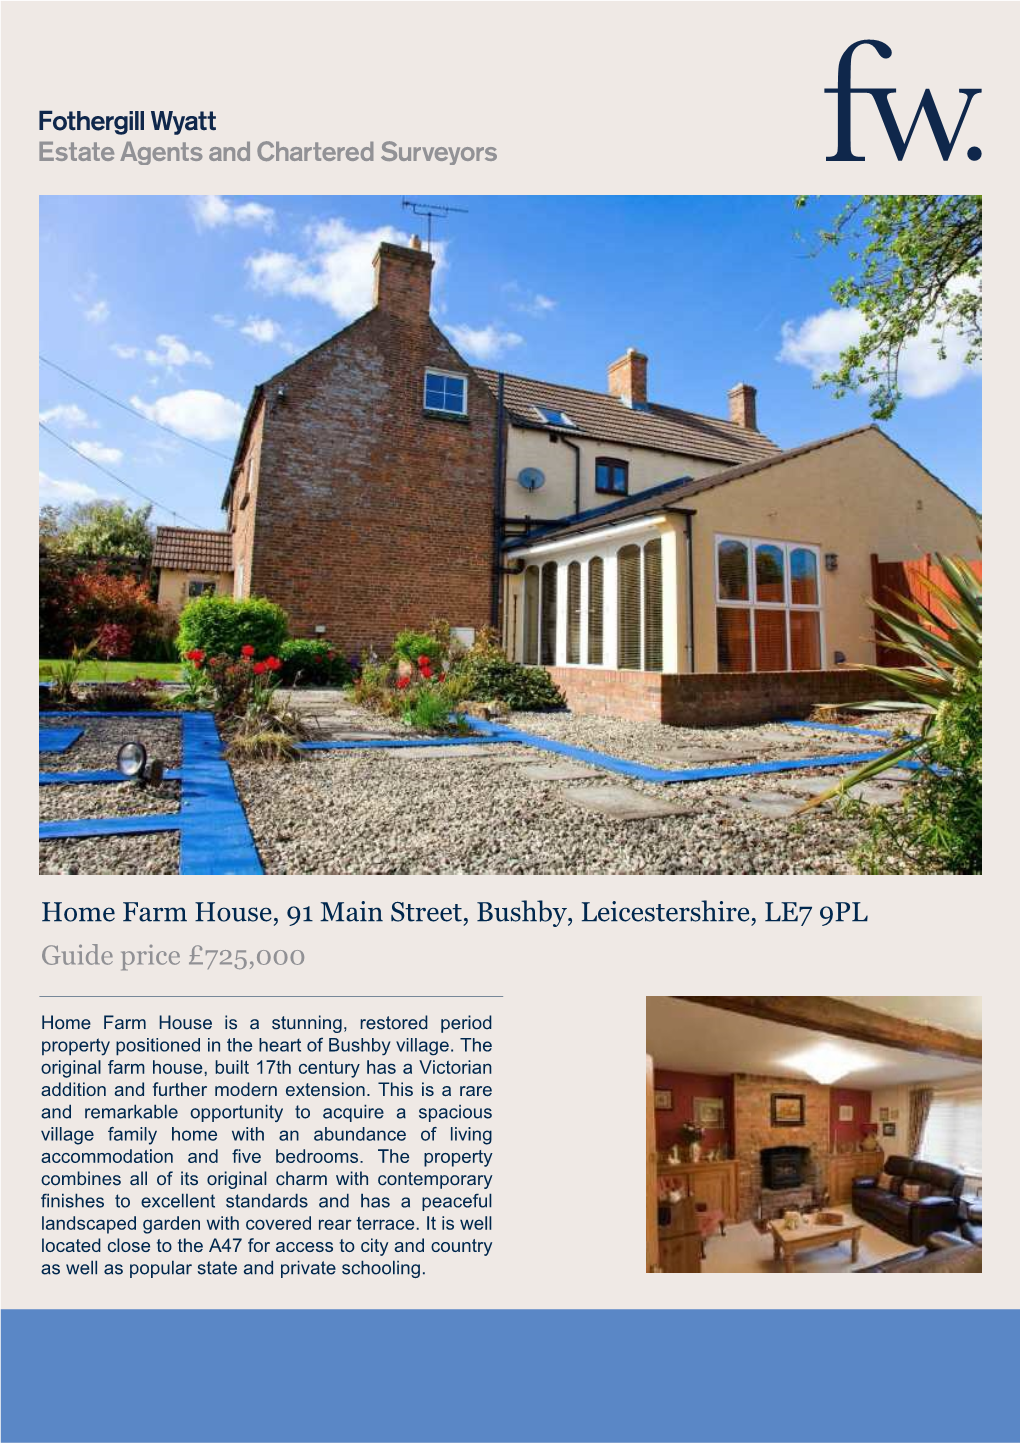 Home Farm House, 91 Main Street, Bushby, Leicestershire, LE7 9PL Guide Price £725,000